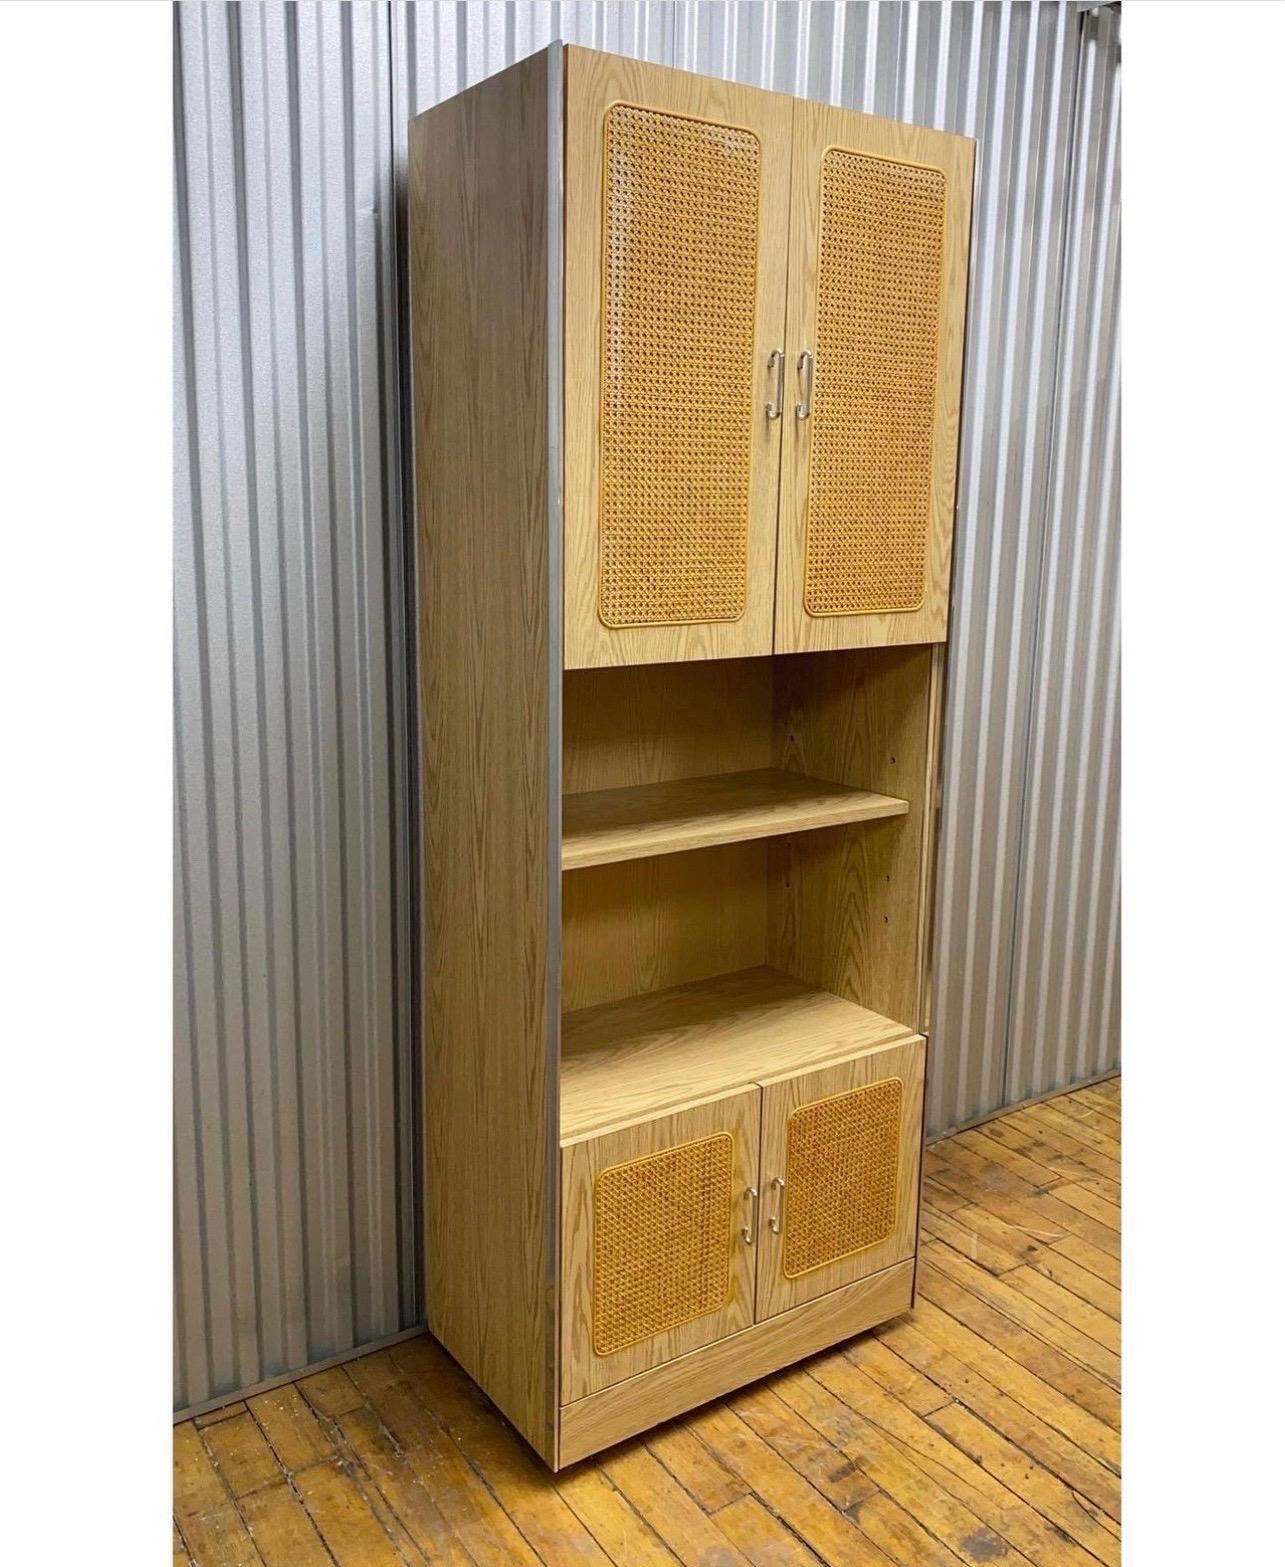 Gorgeous mid-century oak, cane & chrome wall unit featuring adjustable shelving.

Absolutely love this piece! Has ample room for storage as shown. Really heavy and well constructed!

Measures: H 78”
W 30”
D 16”